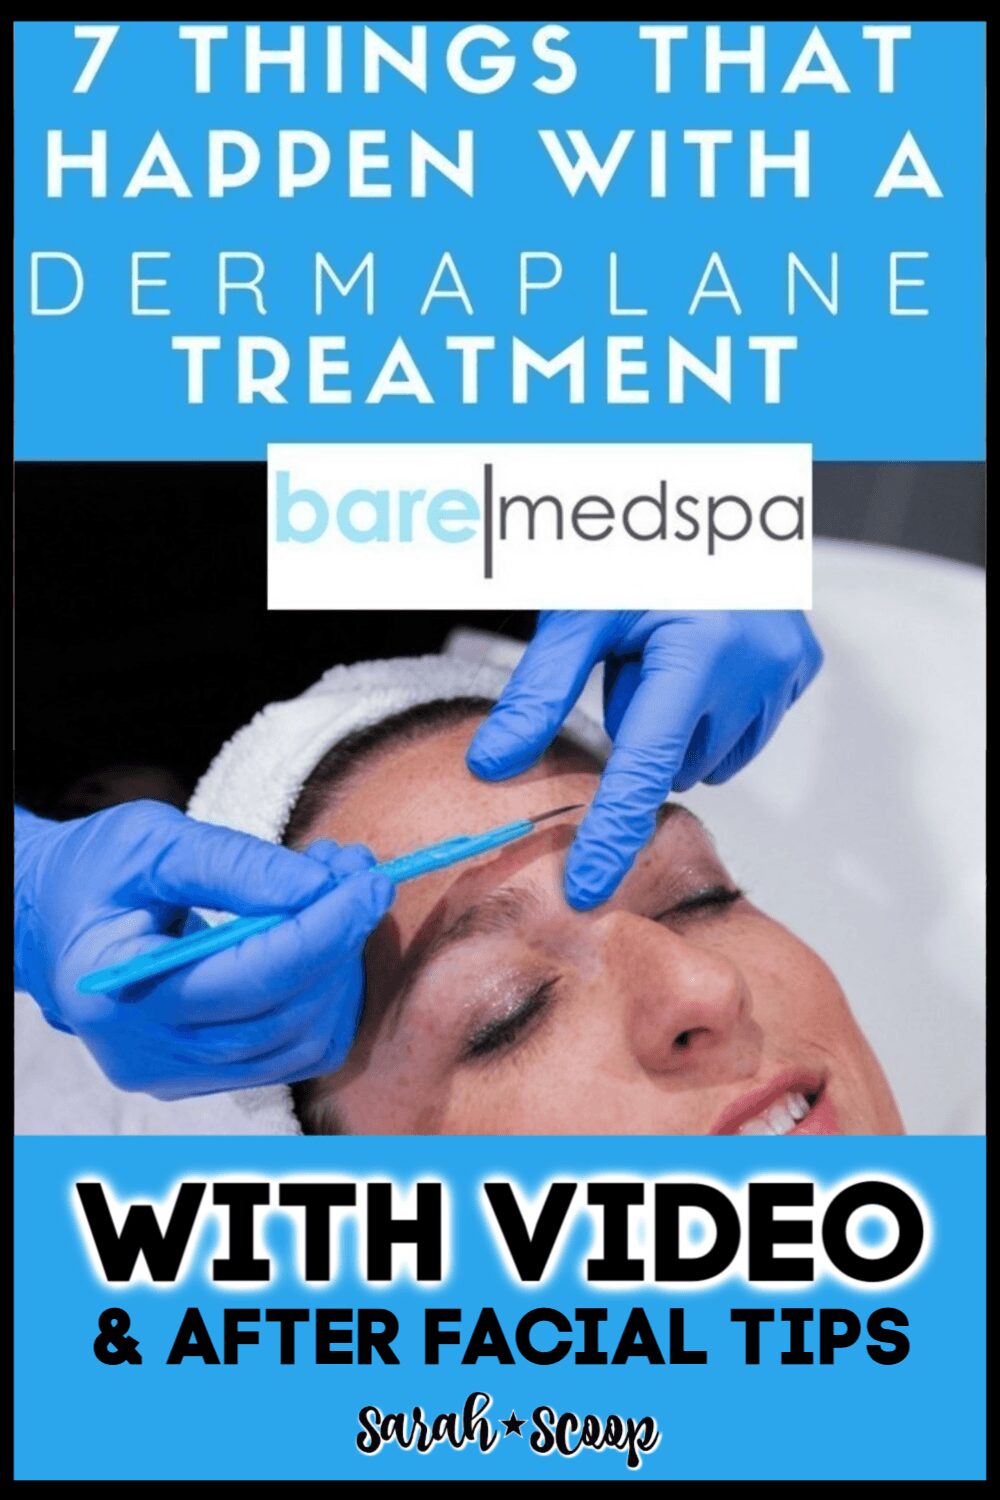 7 tips for what happens during and after a DermaPlane facial treatment.